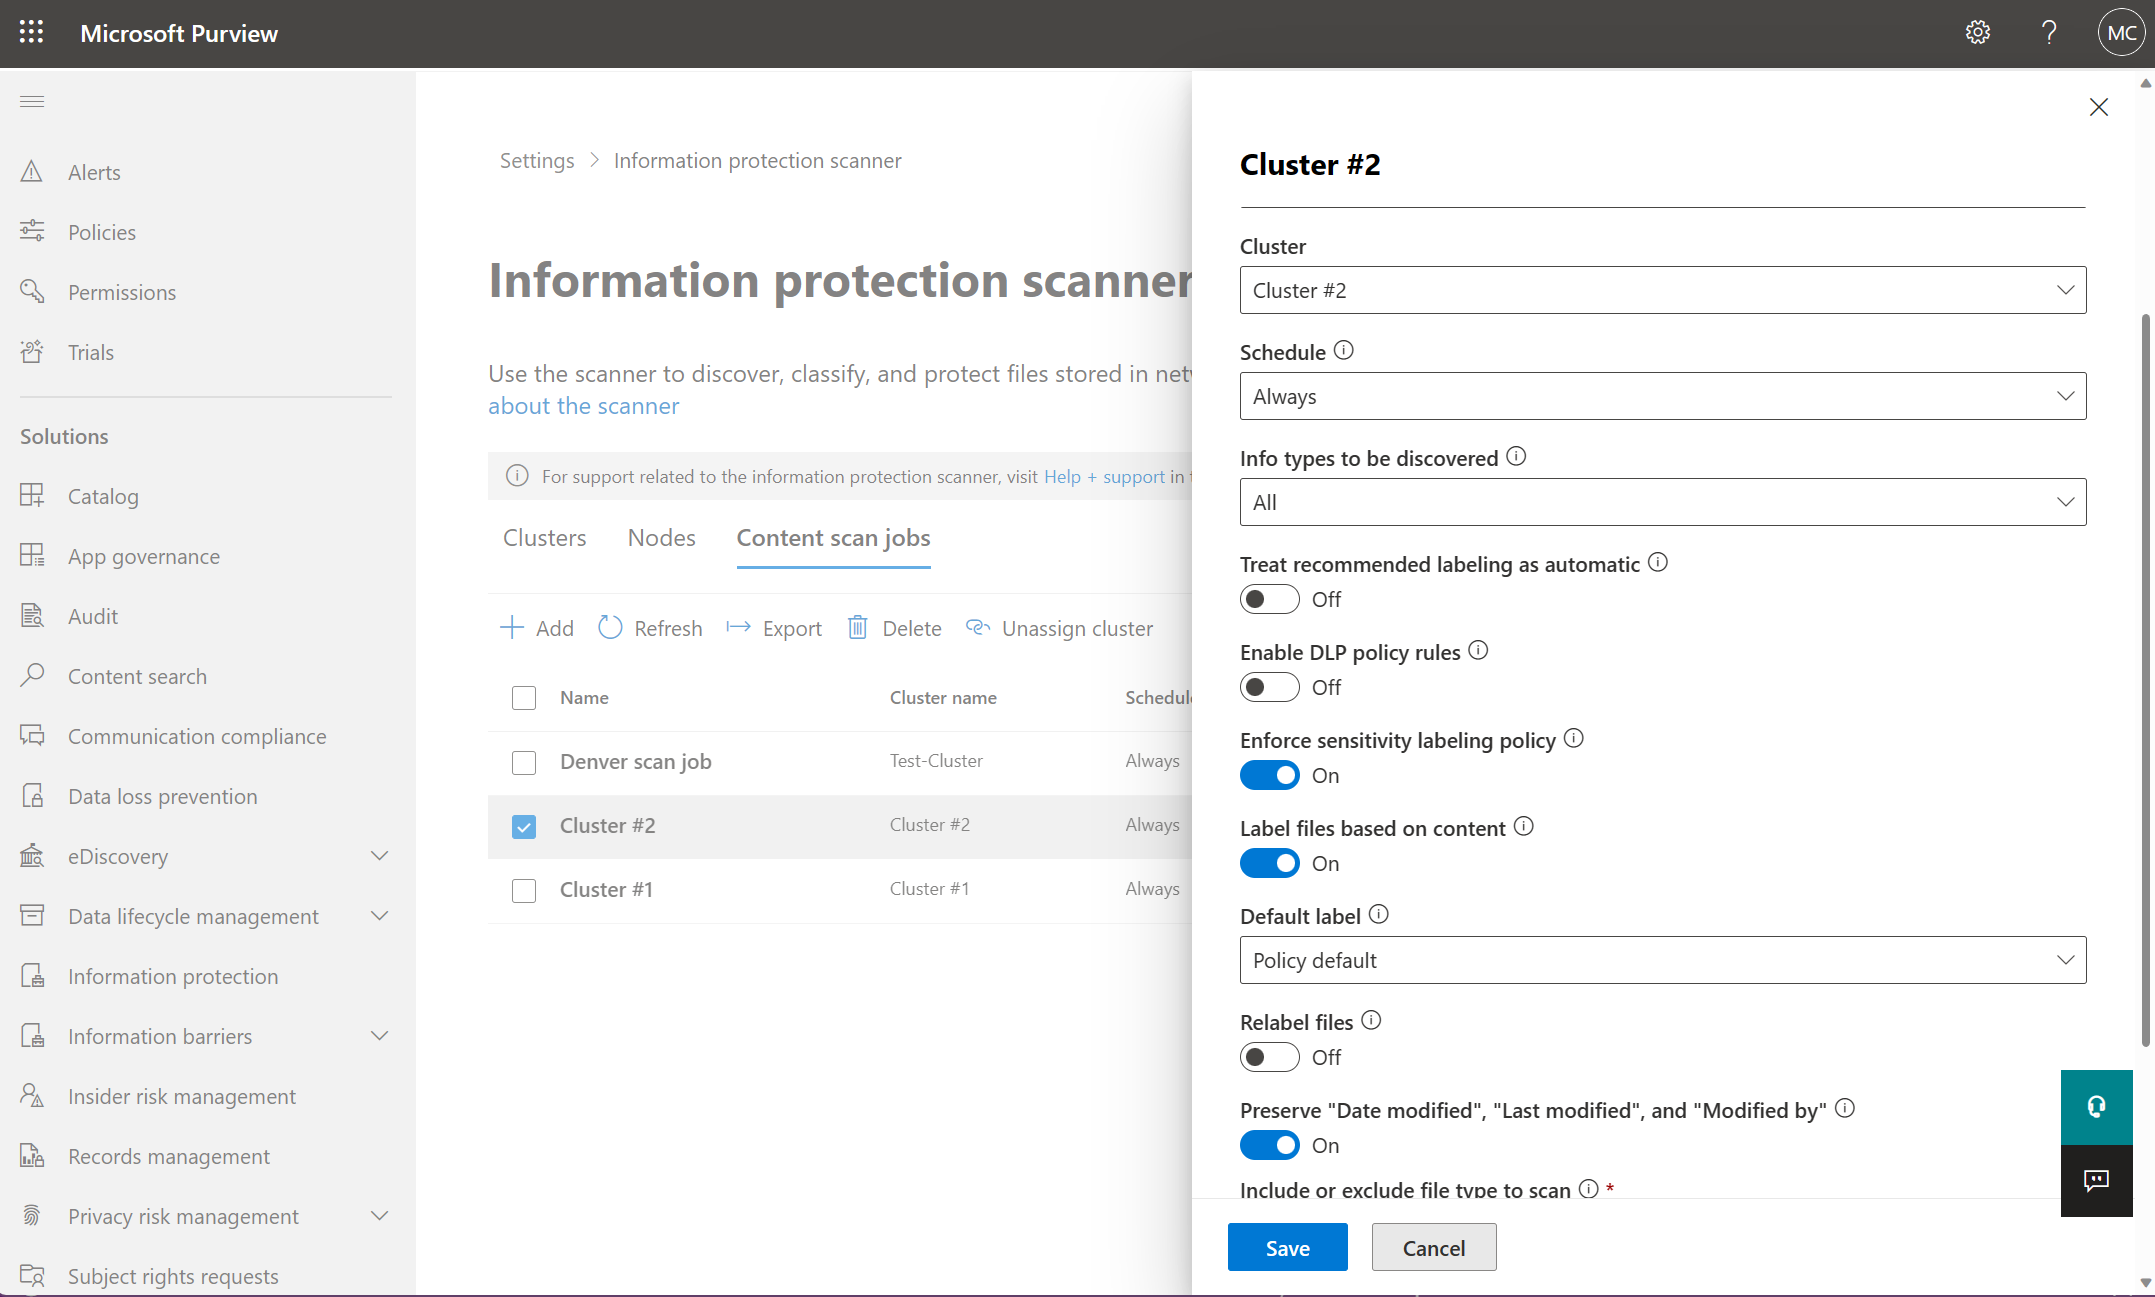 Screenshot of how to configure content scan jobs on information protection scanner.